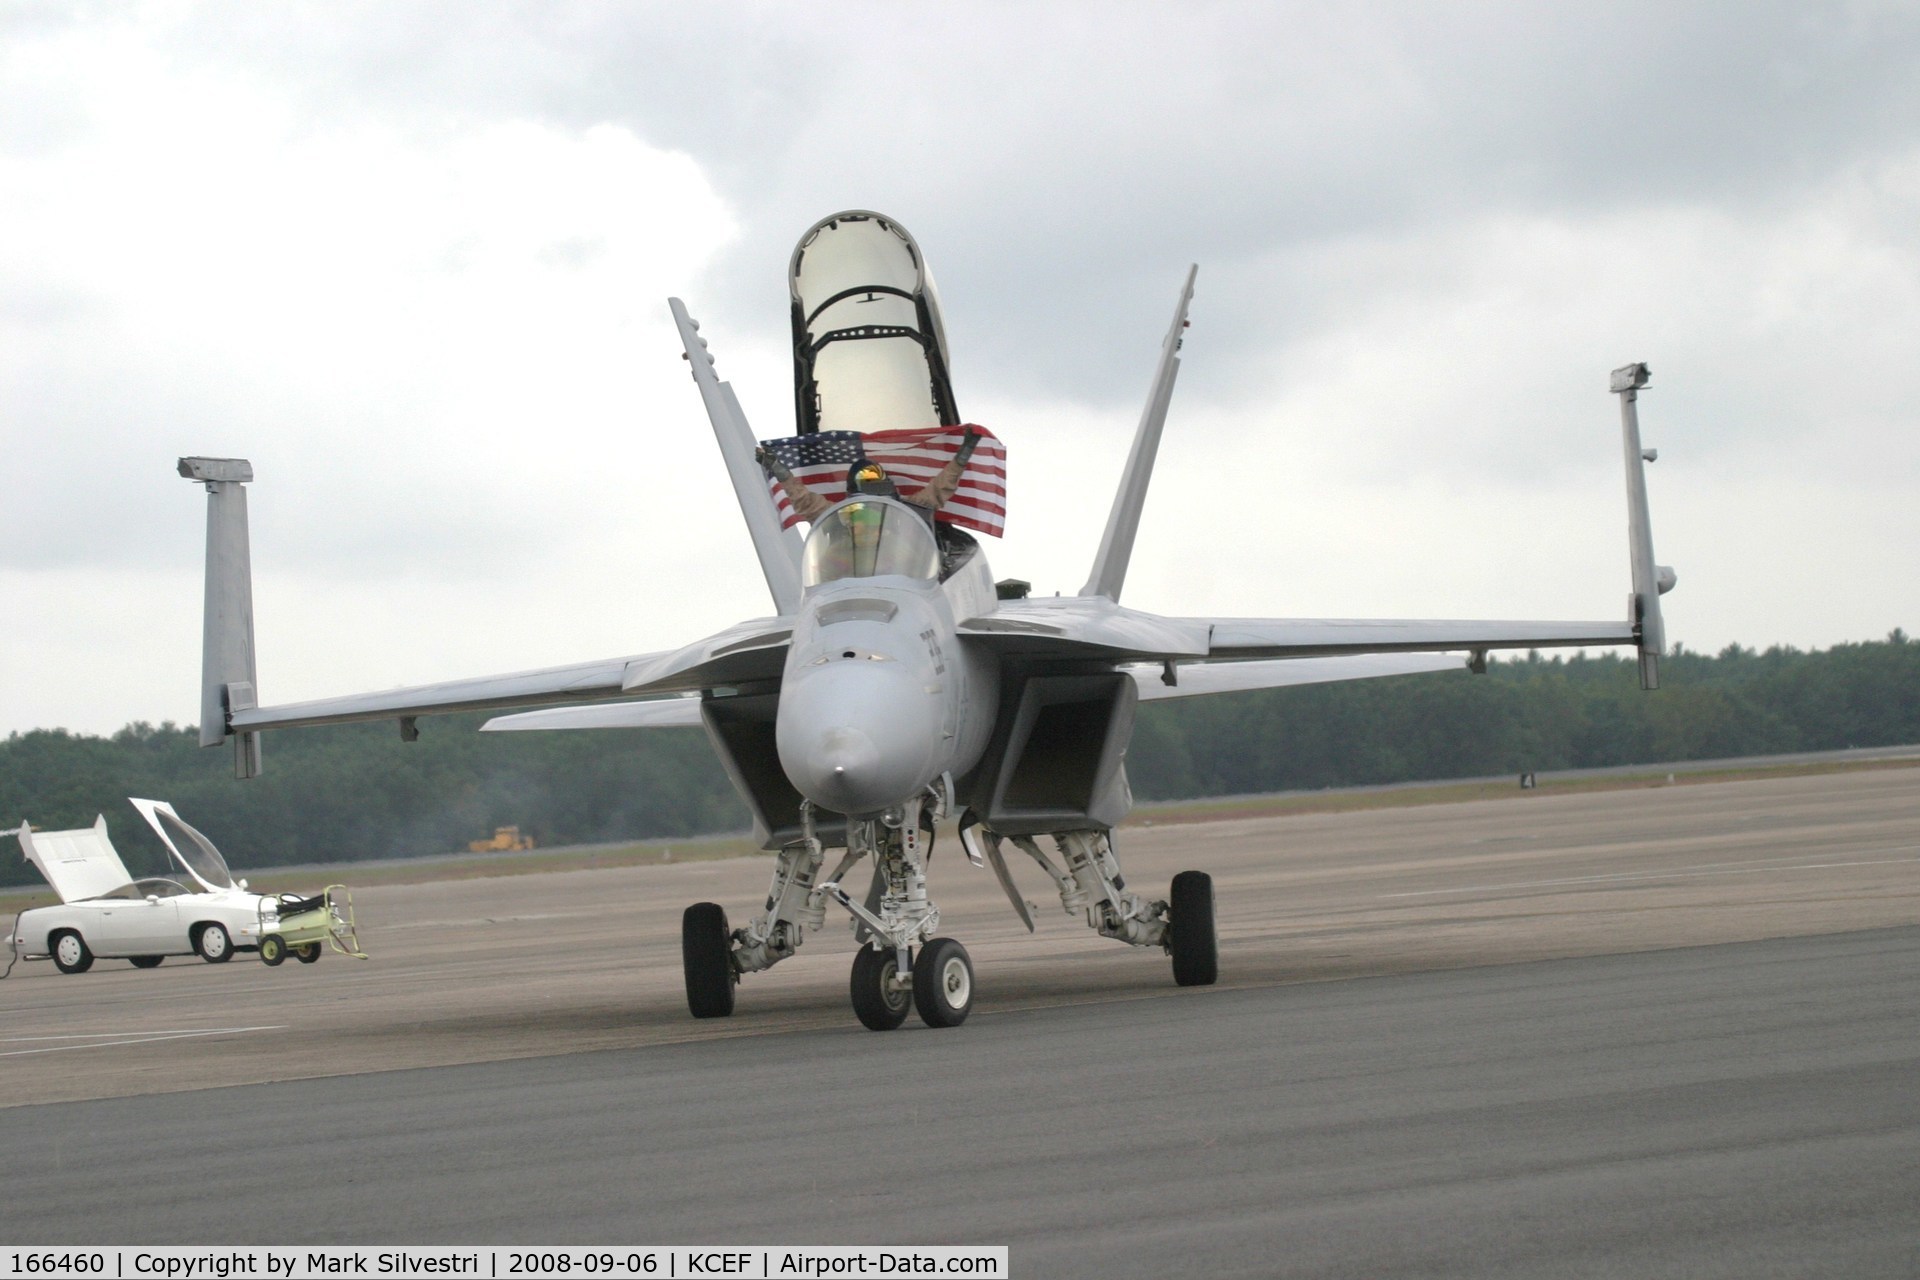 166460, Boeing F/A-18F Super Hornet C/N F095, Westover ARB 2008 - After a great Demo, Flag pulls up the Wing tips and Menudo shows the Stars and Stripes